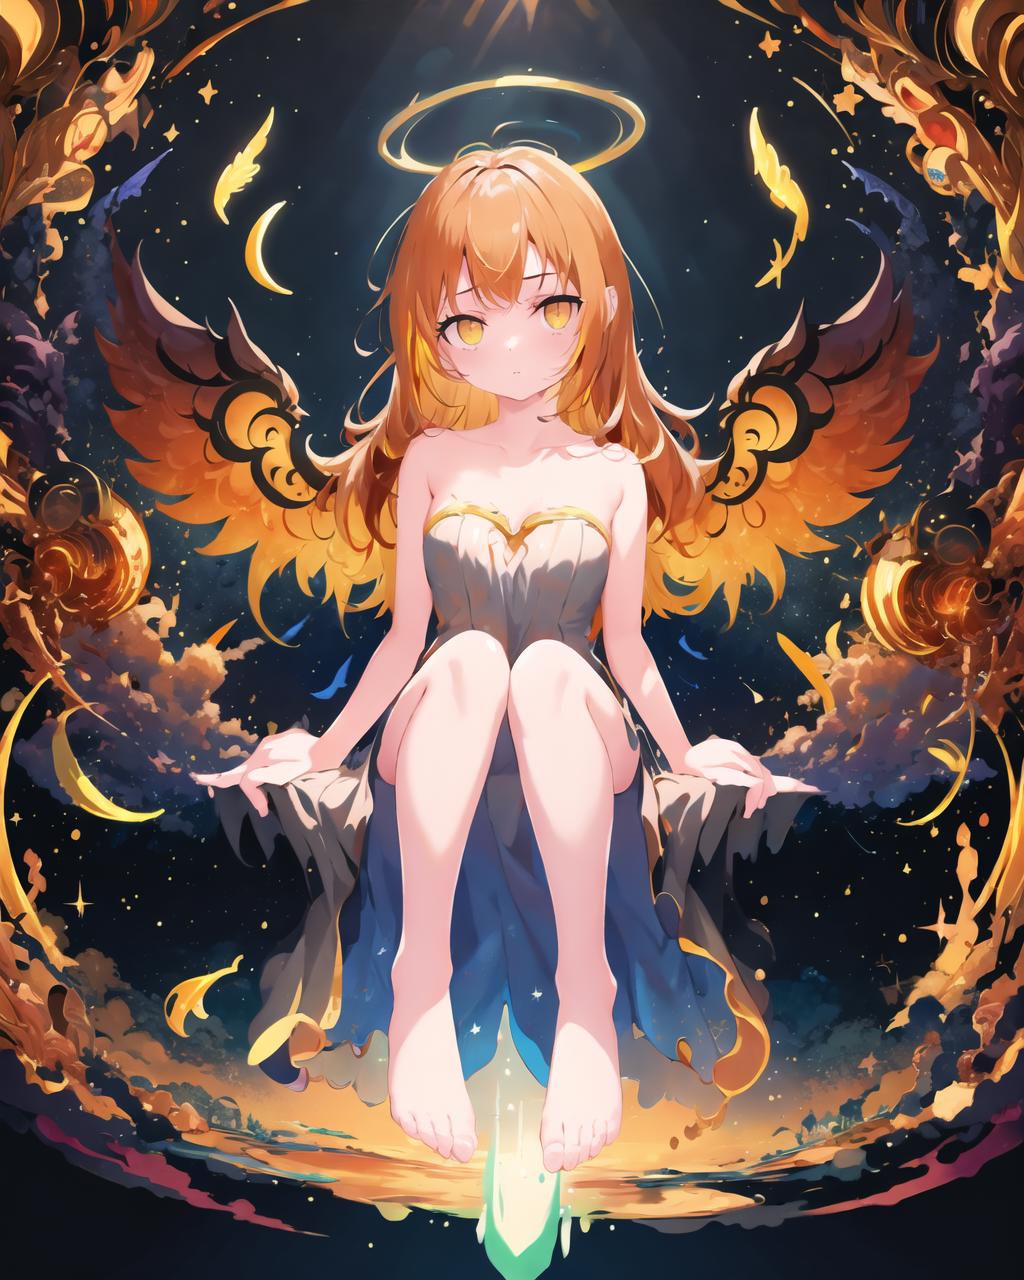 Change-A-Character: Angel-ify Your Waifu Today! image by 21212